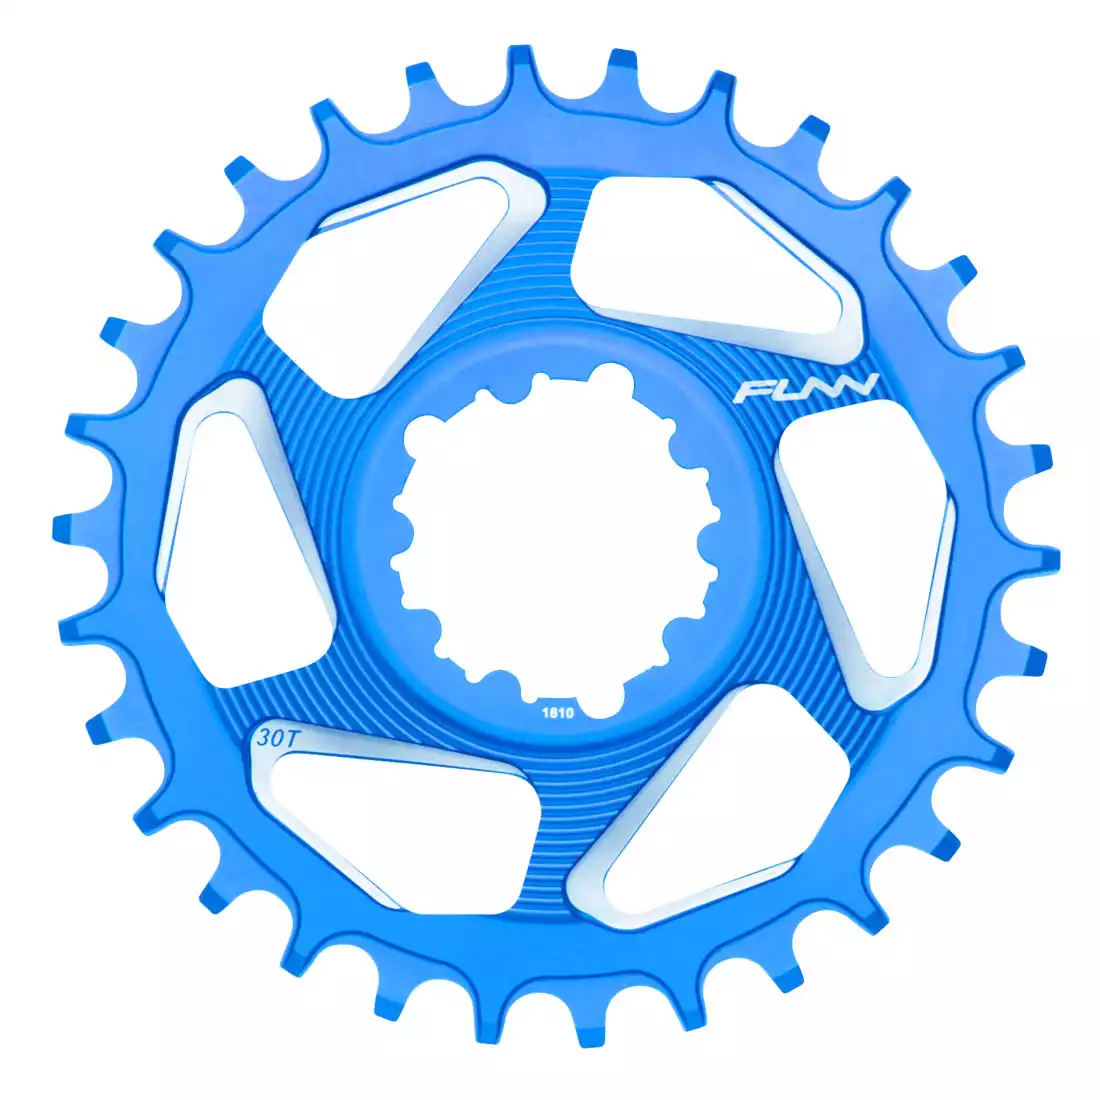 FUNN SOLO DX 34T NARROW- WIDE bicycle sprocket to crank blue